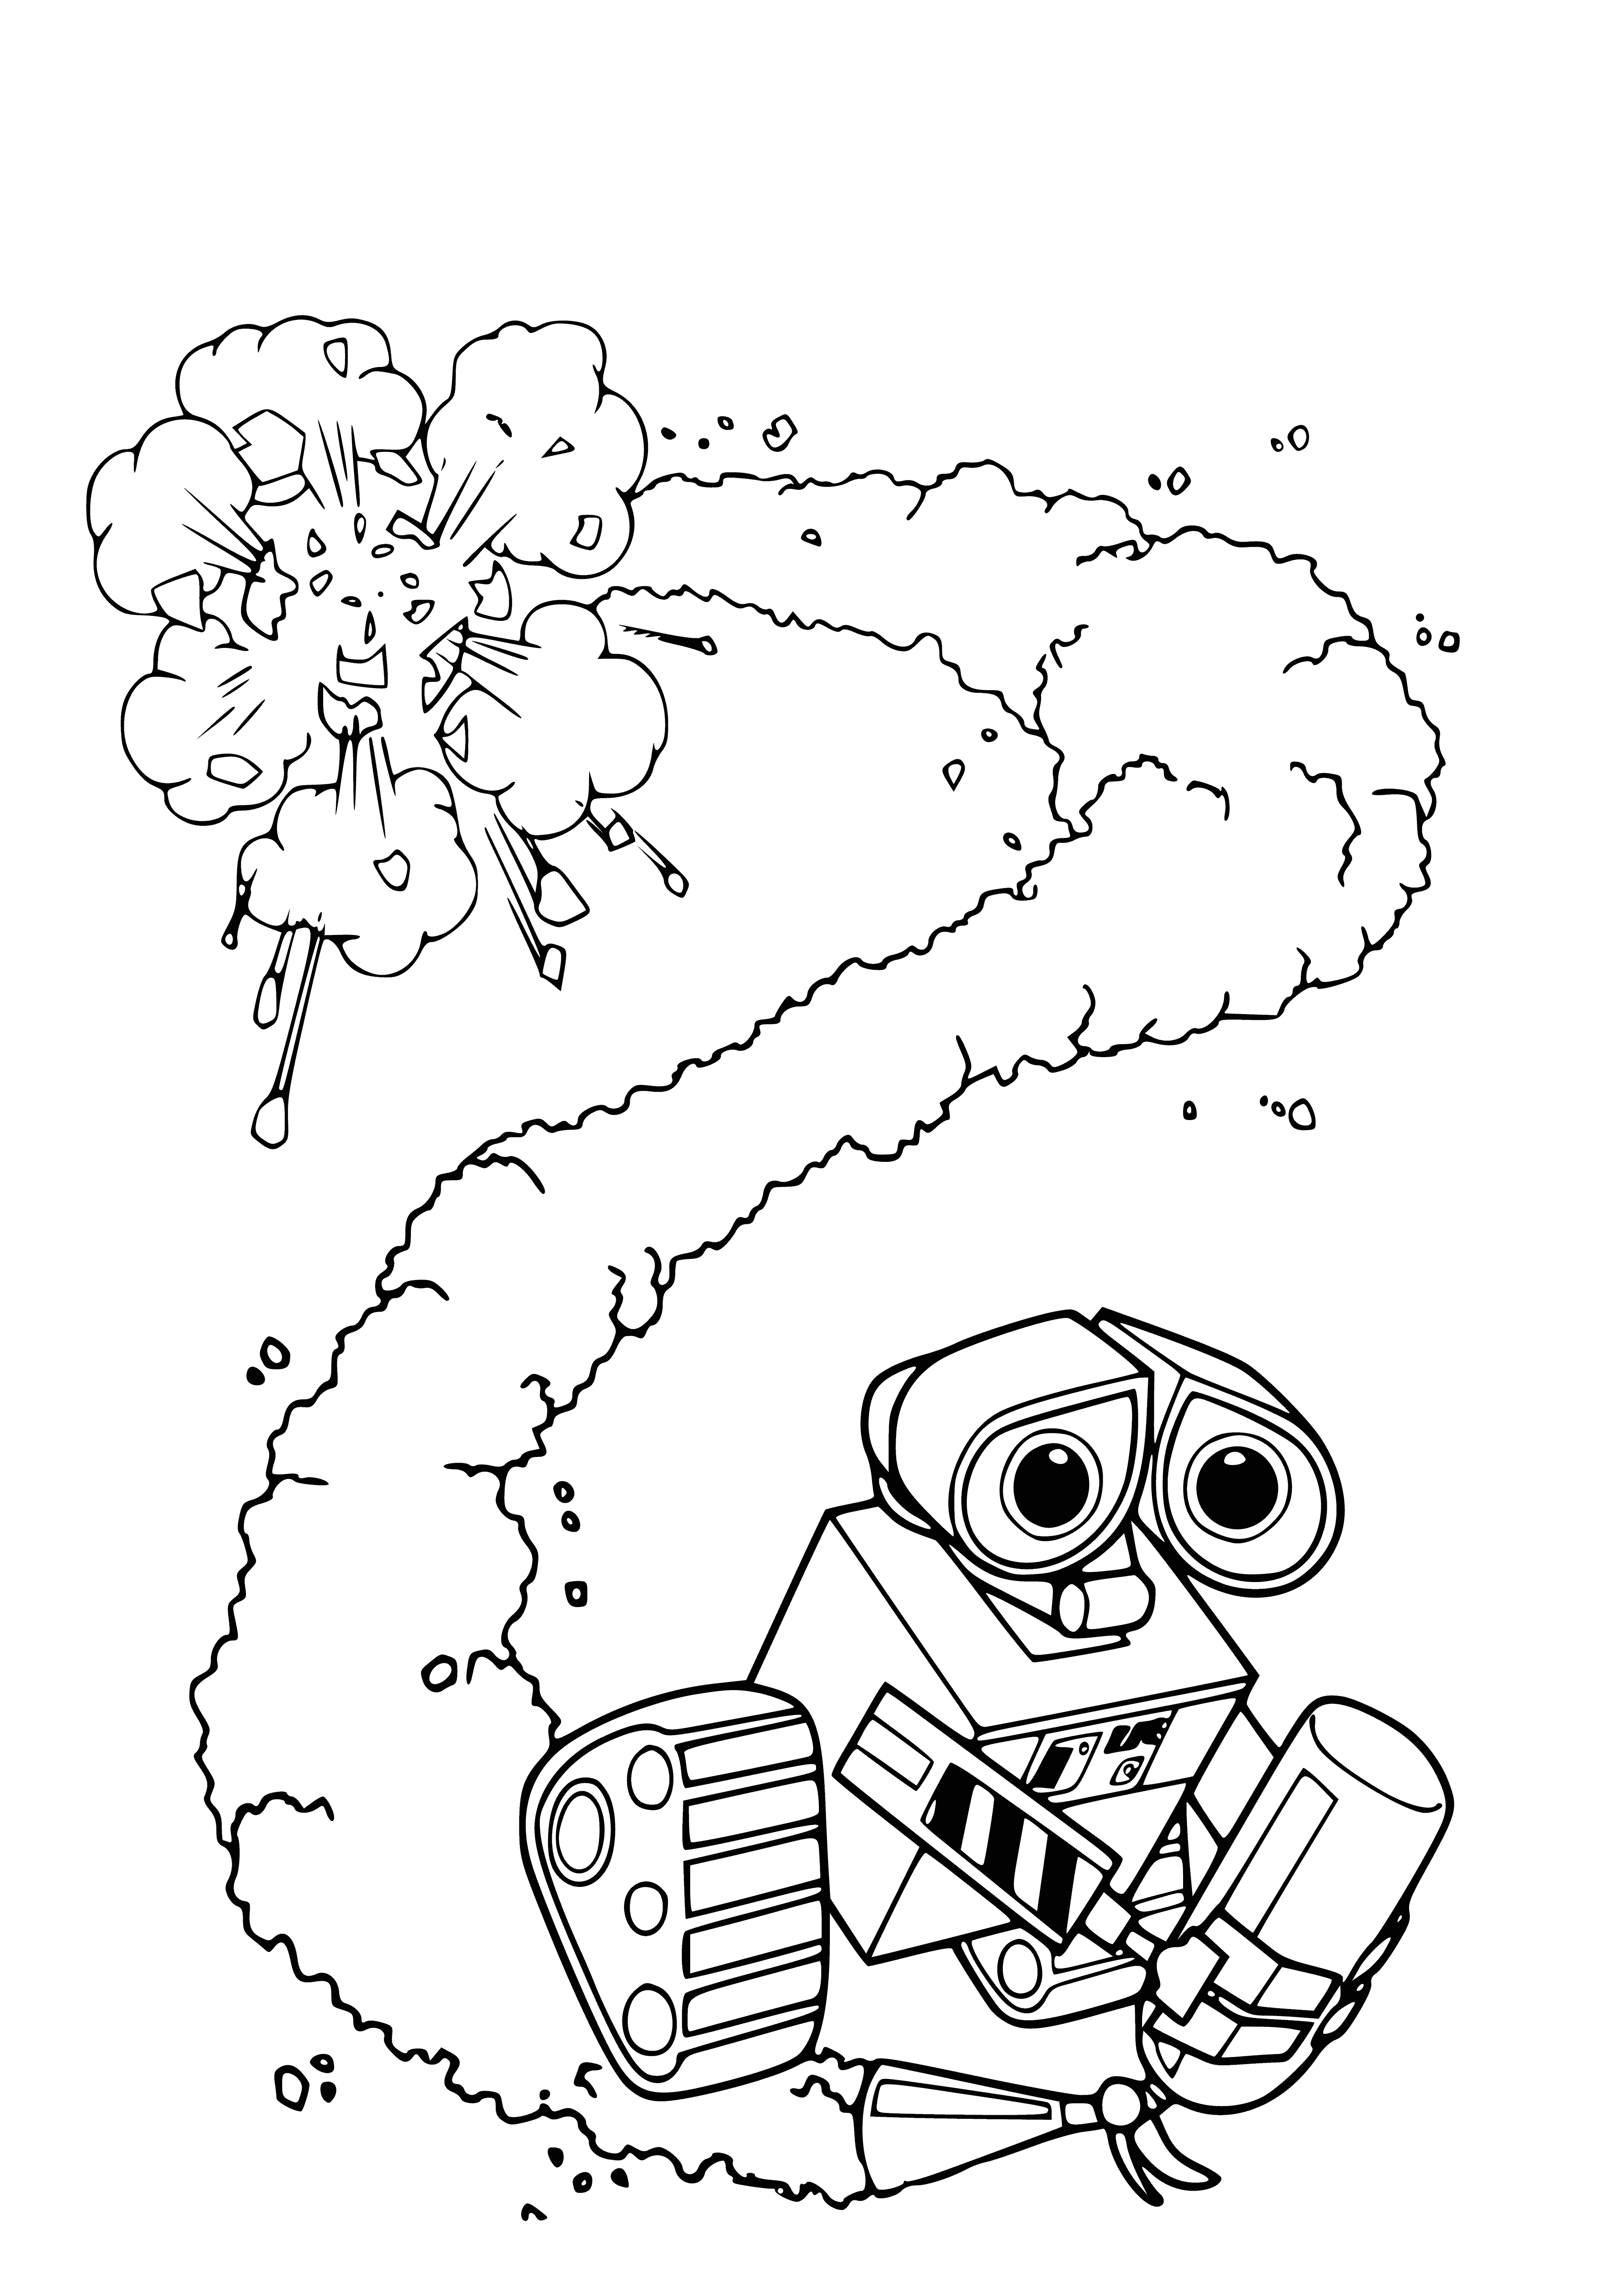 coloring page: Robot Wall-e stands in a valley, ready to fight fires with a fire extinguisher.